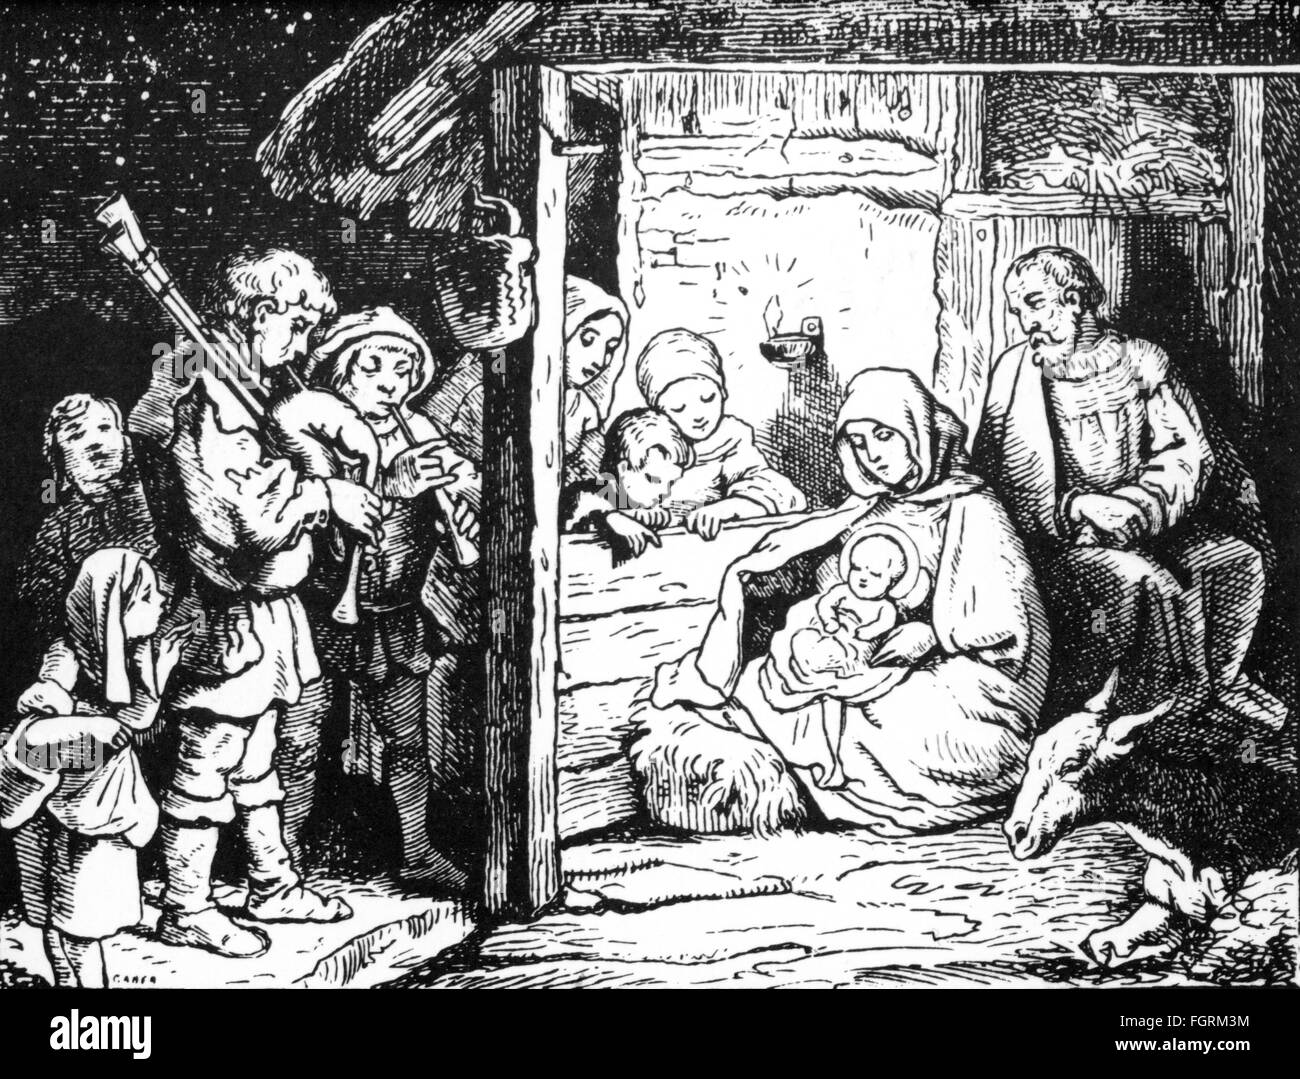 religion,Christianity,Jesus Christ,birth,the Holy Family in the stable in Bethlehem,drawing by Ludwig Richter,19th century,The Nativity,Madonna,Saint Mary,Our Lady,the Blessed Virgin Mary,the Virgin Mary,Our Blessed Lady,Joseph,herdsman,herder,herdsmen,herders,Christmas,pipes,play the bagpipes,bagpipe,musical instrument,instrument,musical instruments,instruments,make music,play music,making music,playing music,makes music,plays music,made music,played music,playing,play,children,child,kids,kid,people,religion,religions,Additional-Rights-Clearences-Not Available Stock Photo